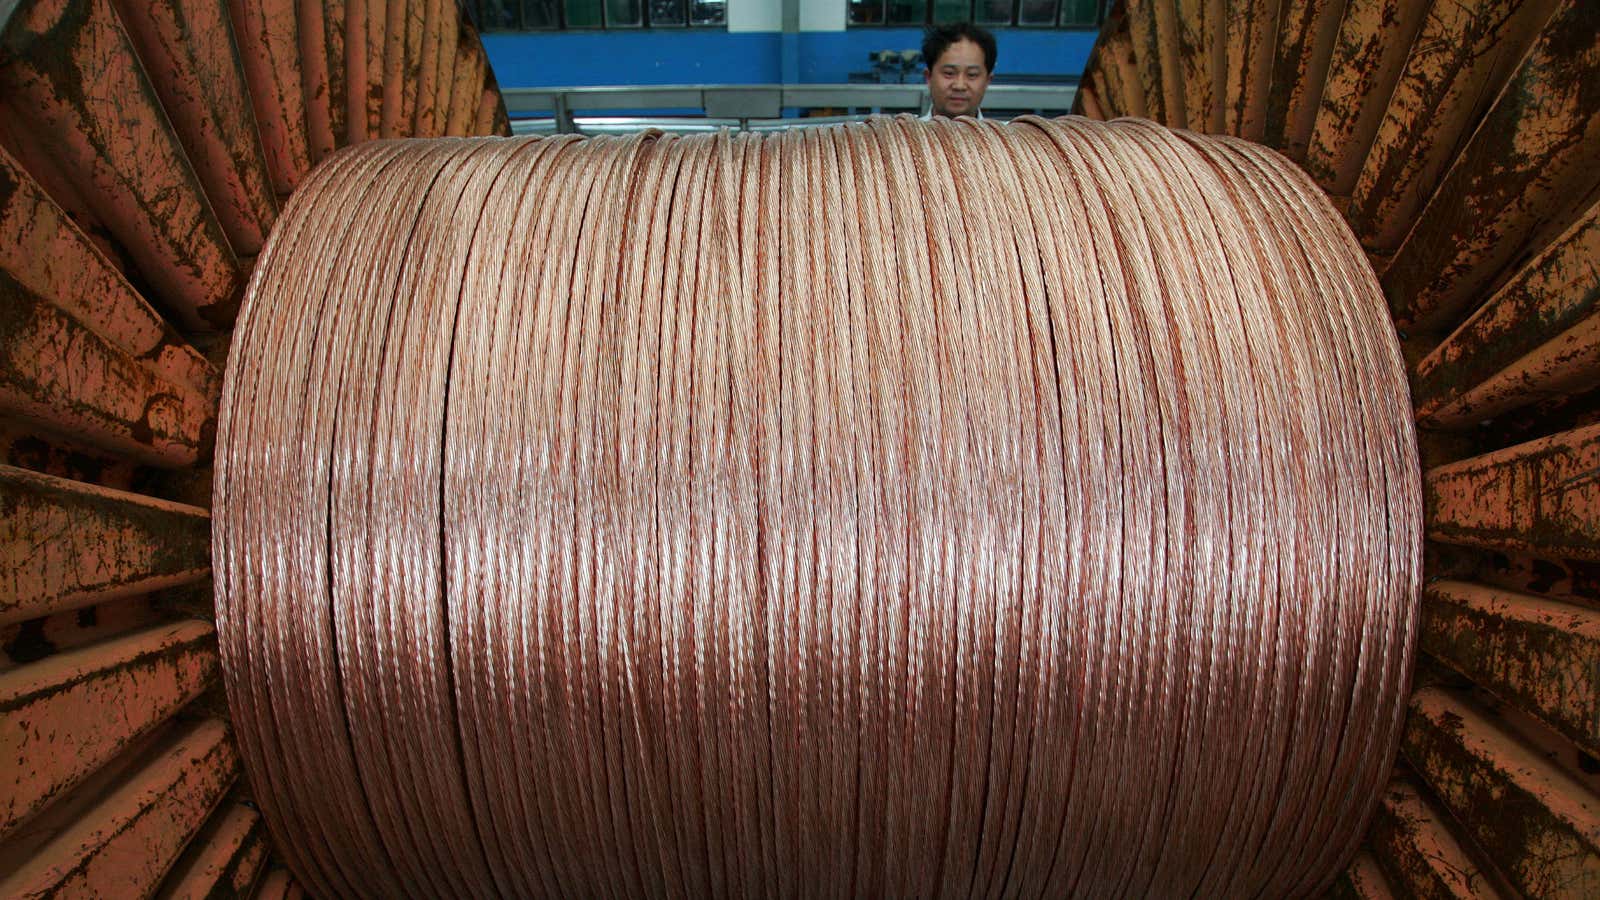 It would be a big deal if the copper market really starts to unravel.